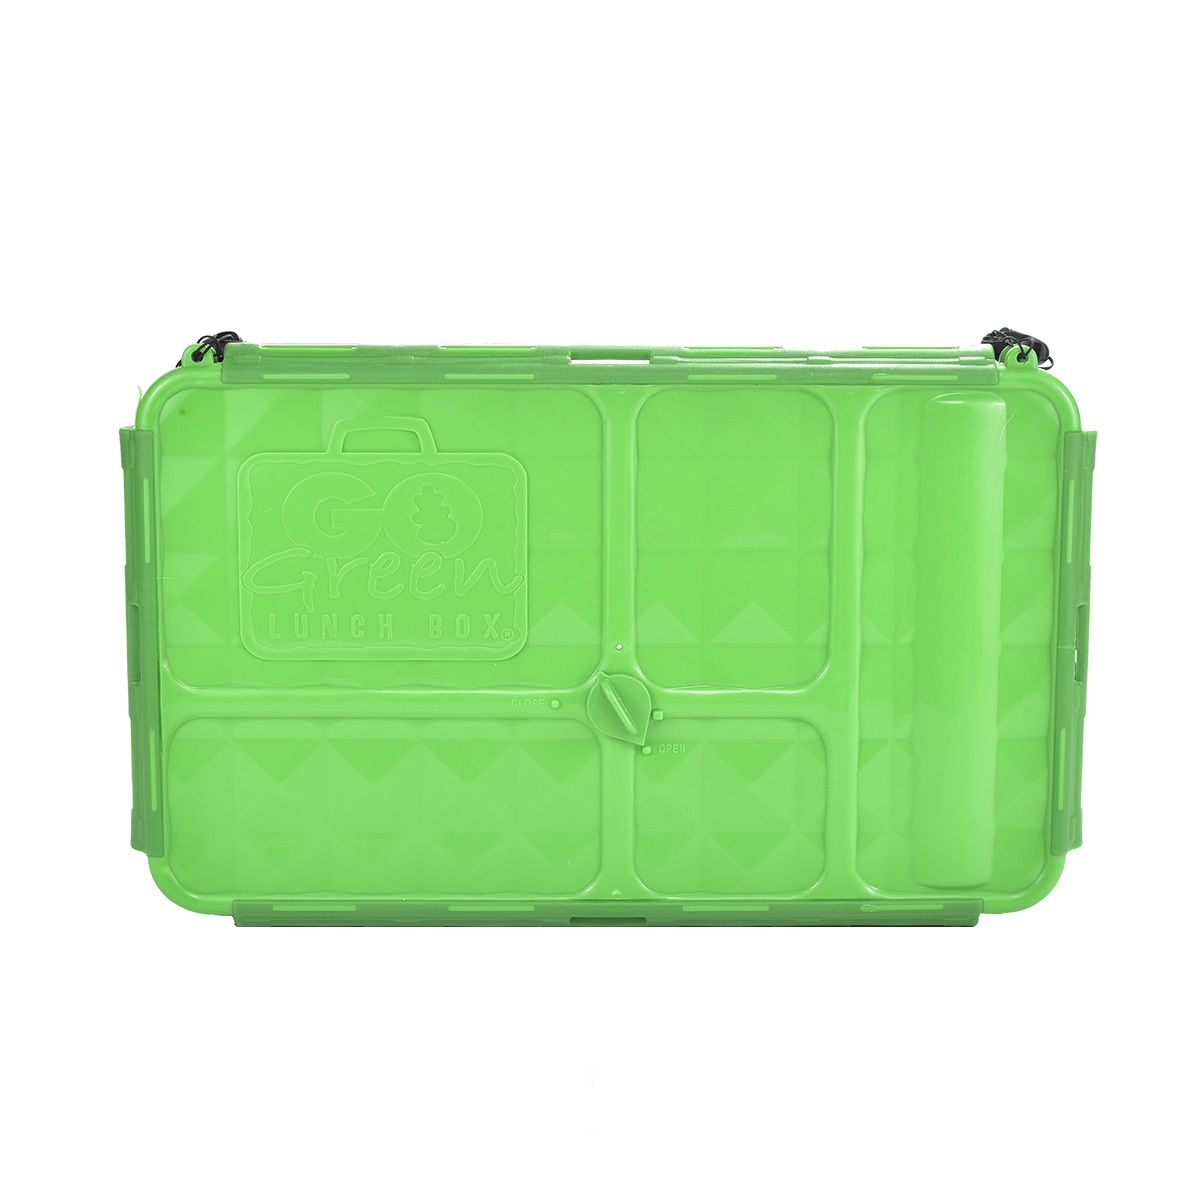 Go Green Lunch Box | LARGE - Green - phunkyBento